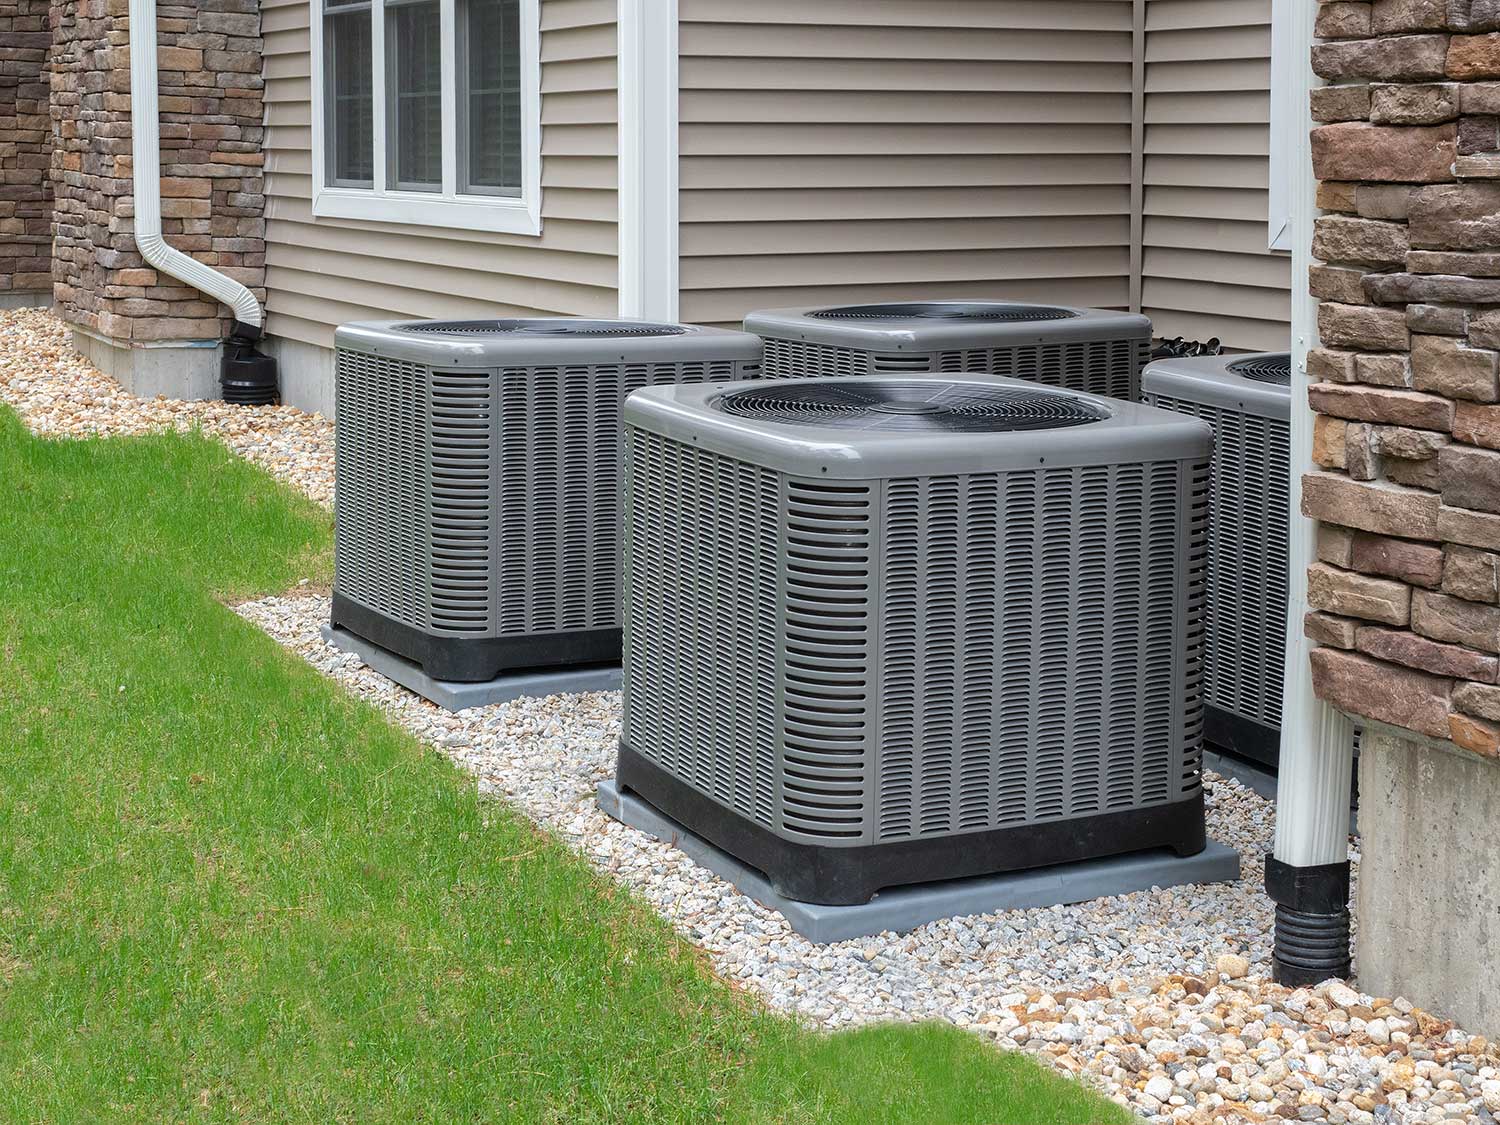 More about those smaller a/c units